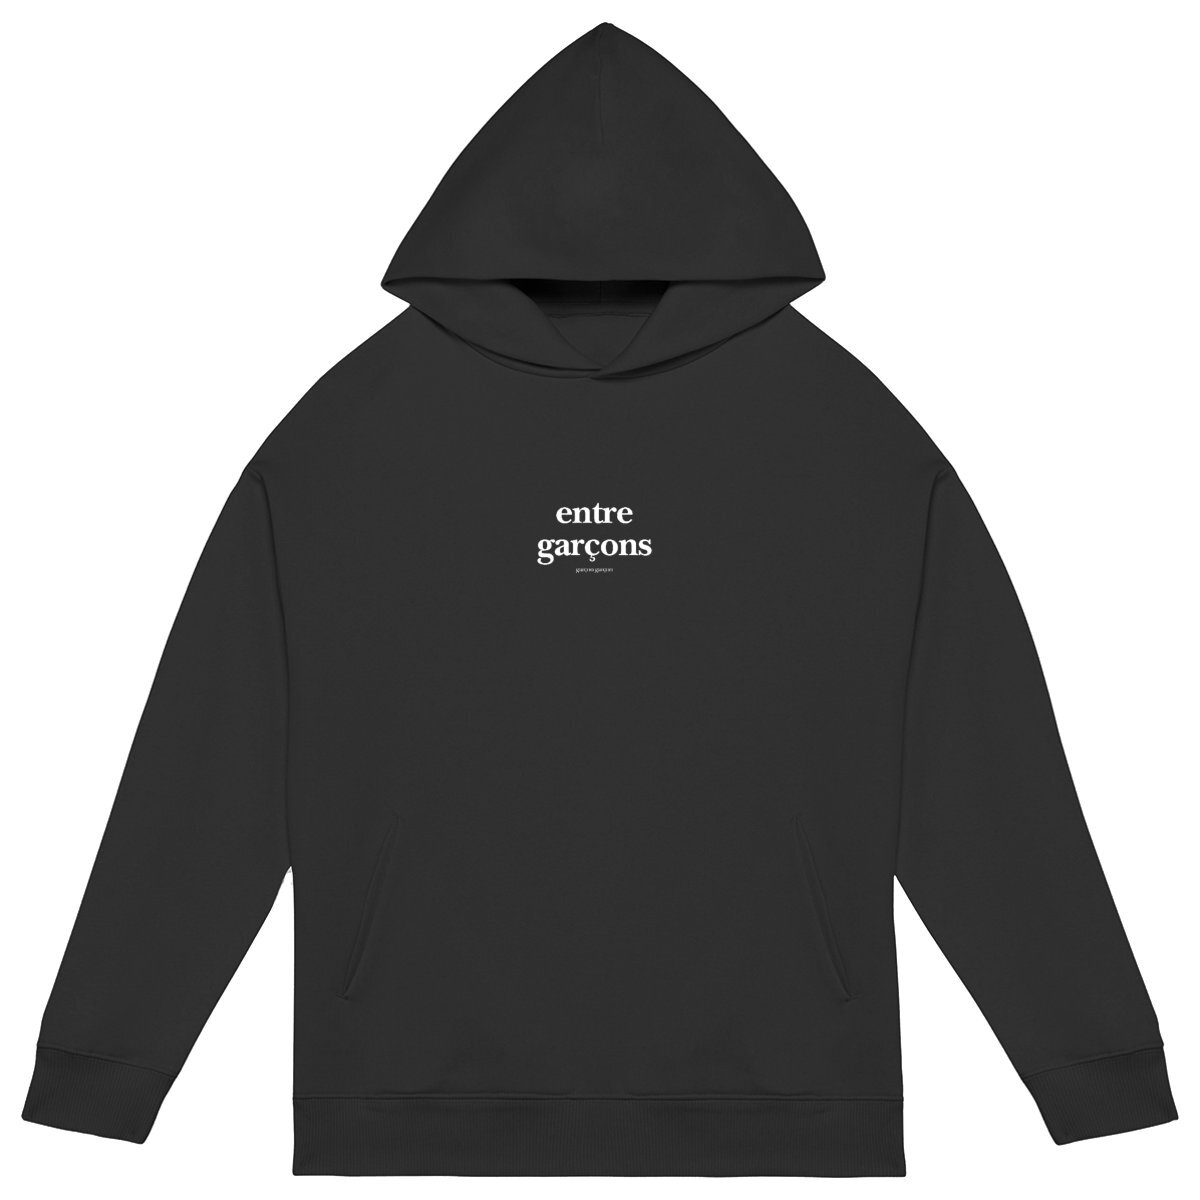 entre garçons hoodie over. garçon garçon essentiel oversized hoodie. Sleek in black and whispering Parisian chic, this hoodie is the sartorial whisper of 'garçon garçon' — a statement of understated elegance. Perfect for those who carry a piece of Paris in their hearts and a touch of audacity on their sleeves.